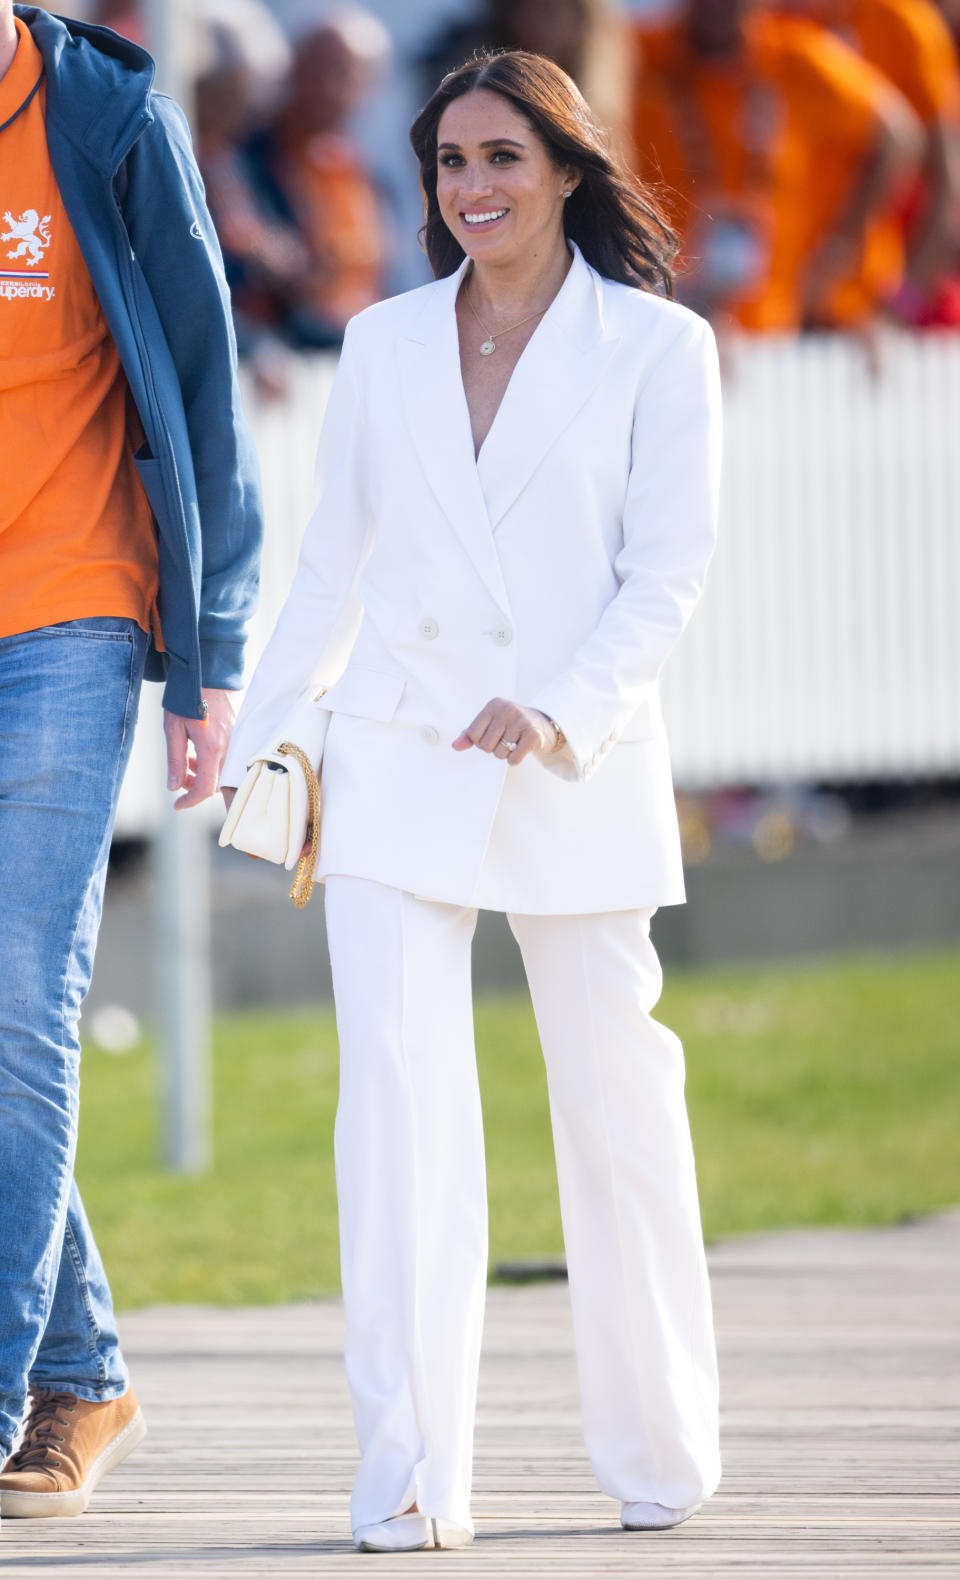 Meghan Markle at the 2020 Invictus Games in a white double breasted suit